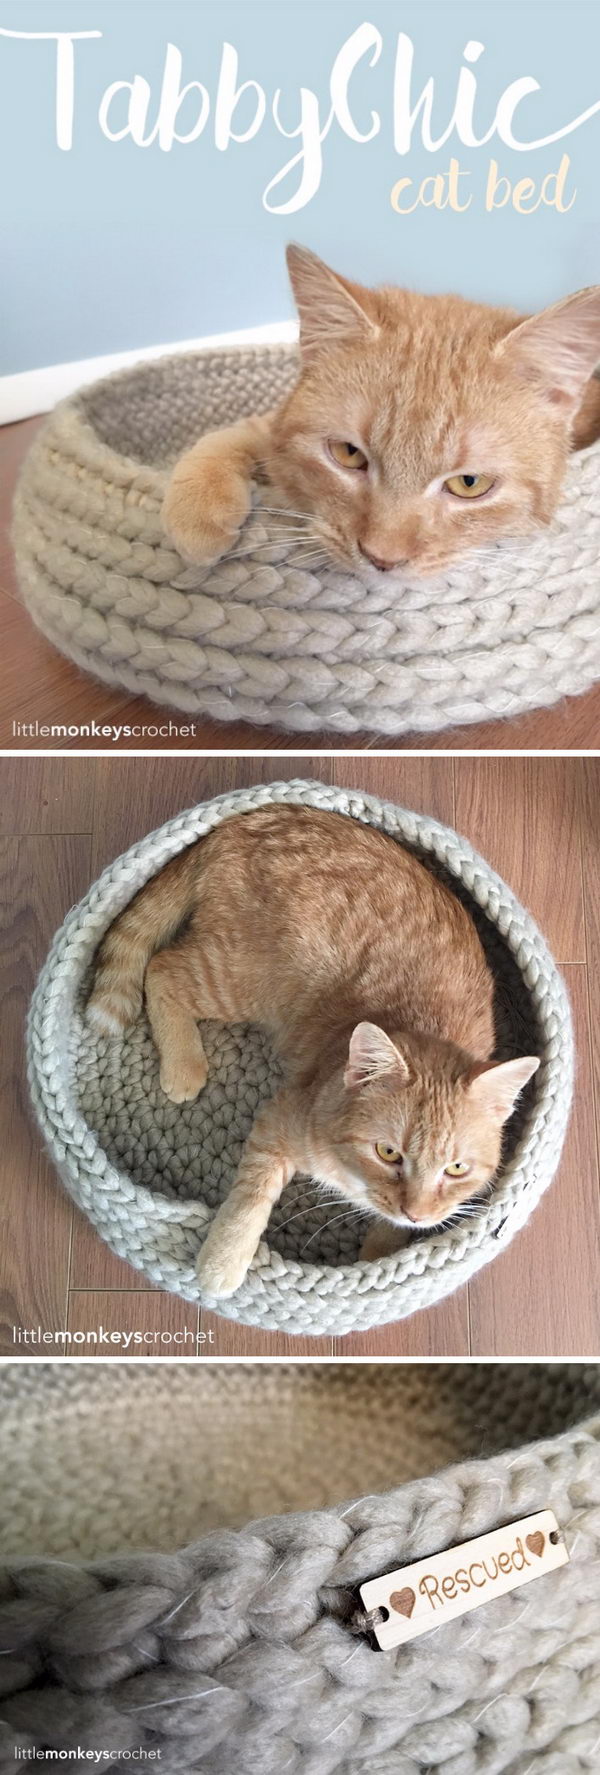 Tabby Chic Cat Bed. 